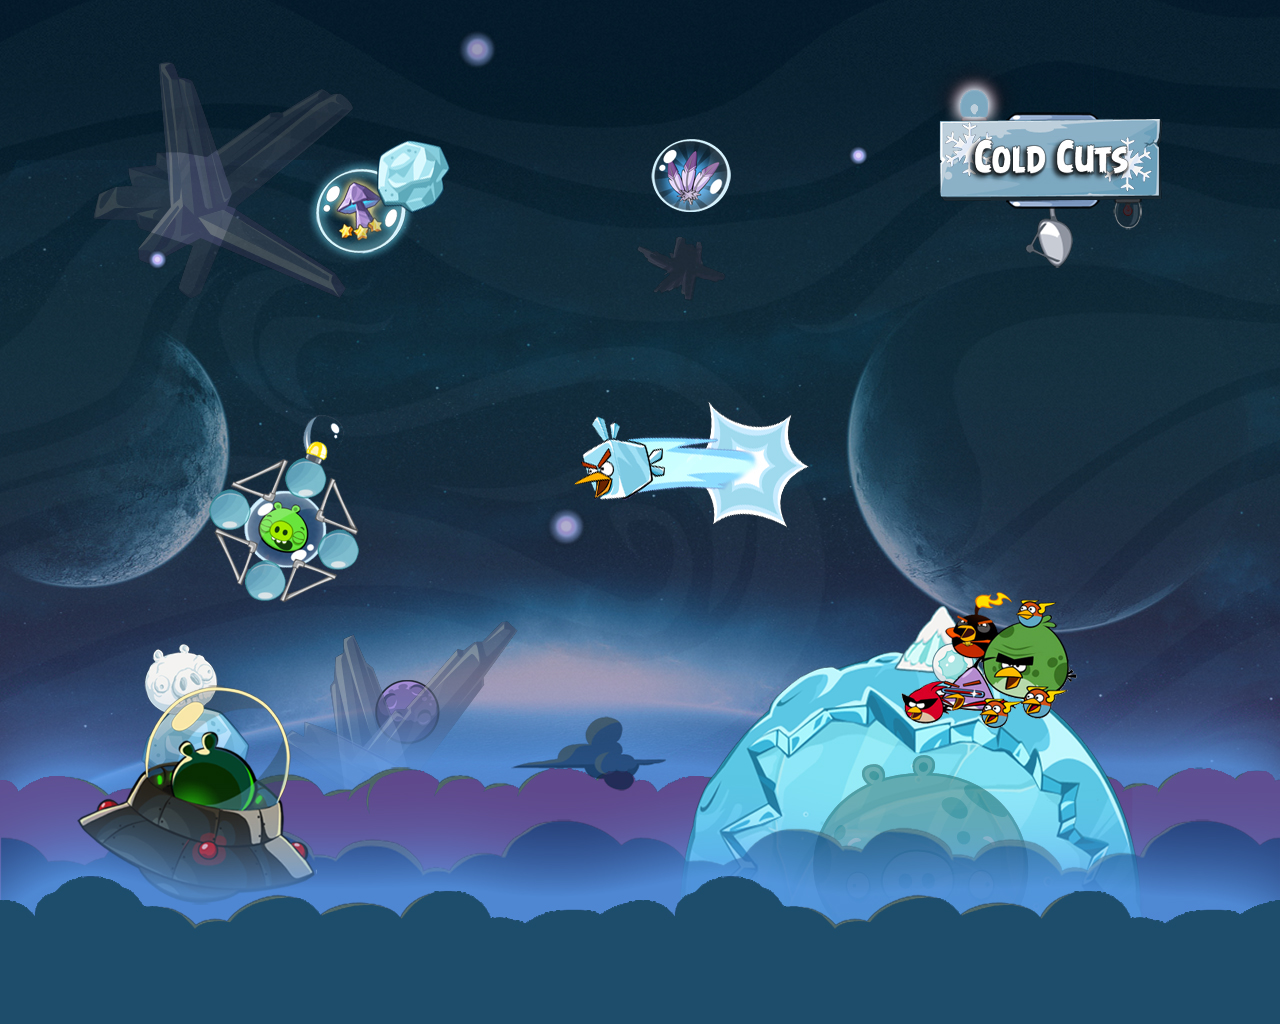 angry birds space wallpapers